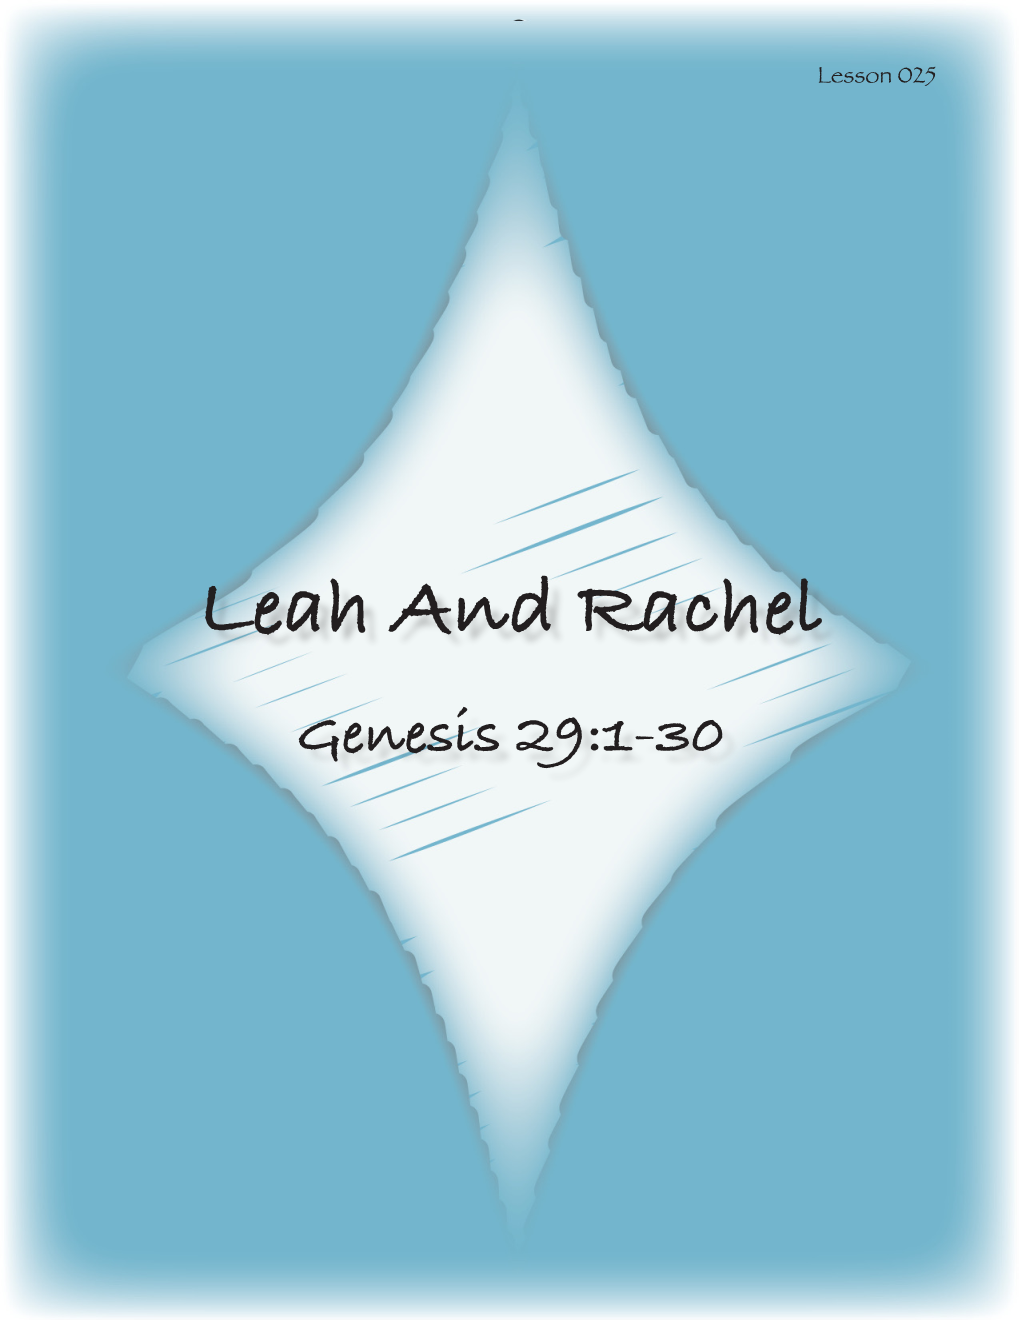 Leah and Rachel Genesis 29:1-30 MEMORY VERSE PROVERBS 11:18 the Wicked M an Does Deceptive Work, but to Him Who Sows Righteousness Will Be a Sure Reward